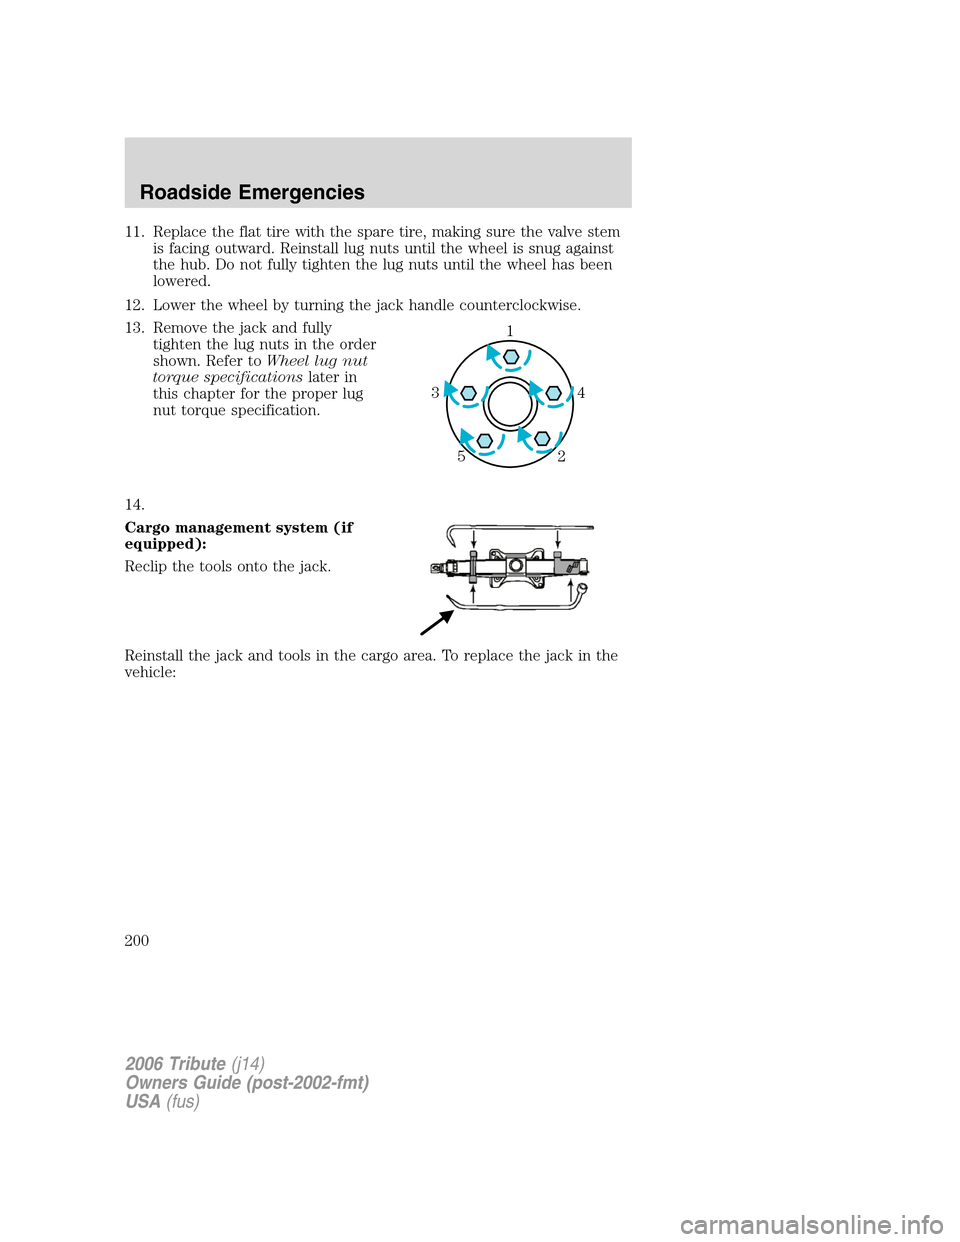 MAZDA MODEL TRIBUTE 2006  Owners Manual (in English) 11. Replace the flat tire with the spare tire, making sure the valve stem
is facing outward. Reinstall lug nuts until the wheel is snug against
the hub. Do not fully tighten the lug nuts until the whe